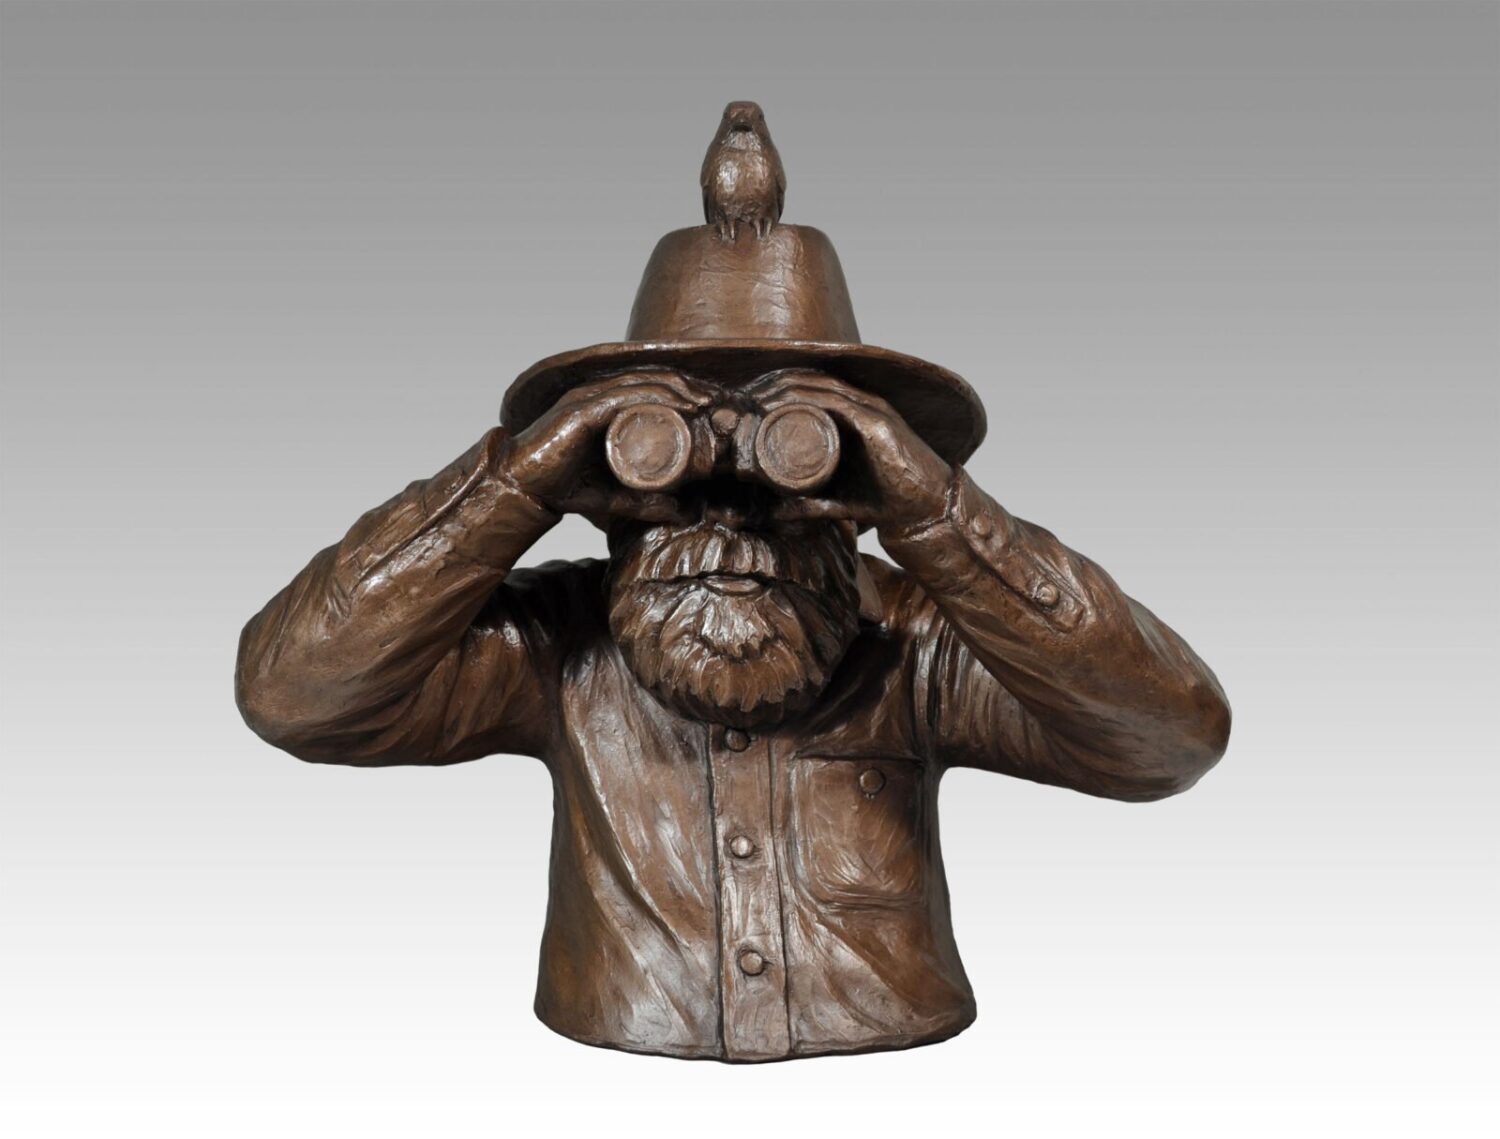 Gallery, A Big Year, $1,500 CAD, Metal Infused (Exterior/Interior), 17 ½” H x 17 ½” W, Edition 30, Sculpture of a birder with a bird on his hat, Sculptor Tyler Fauvelle